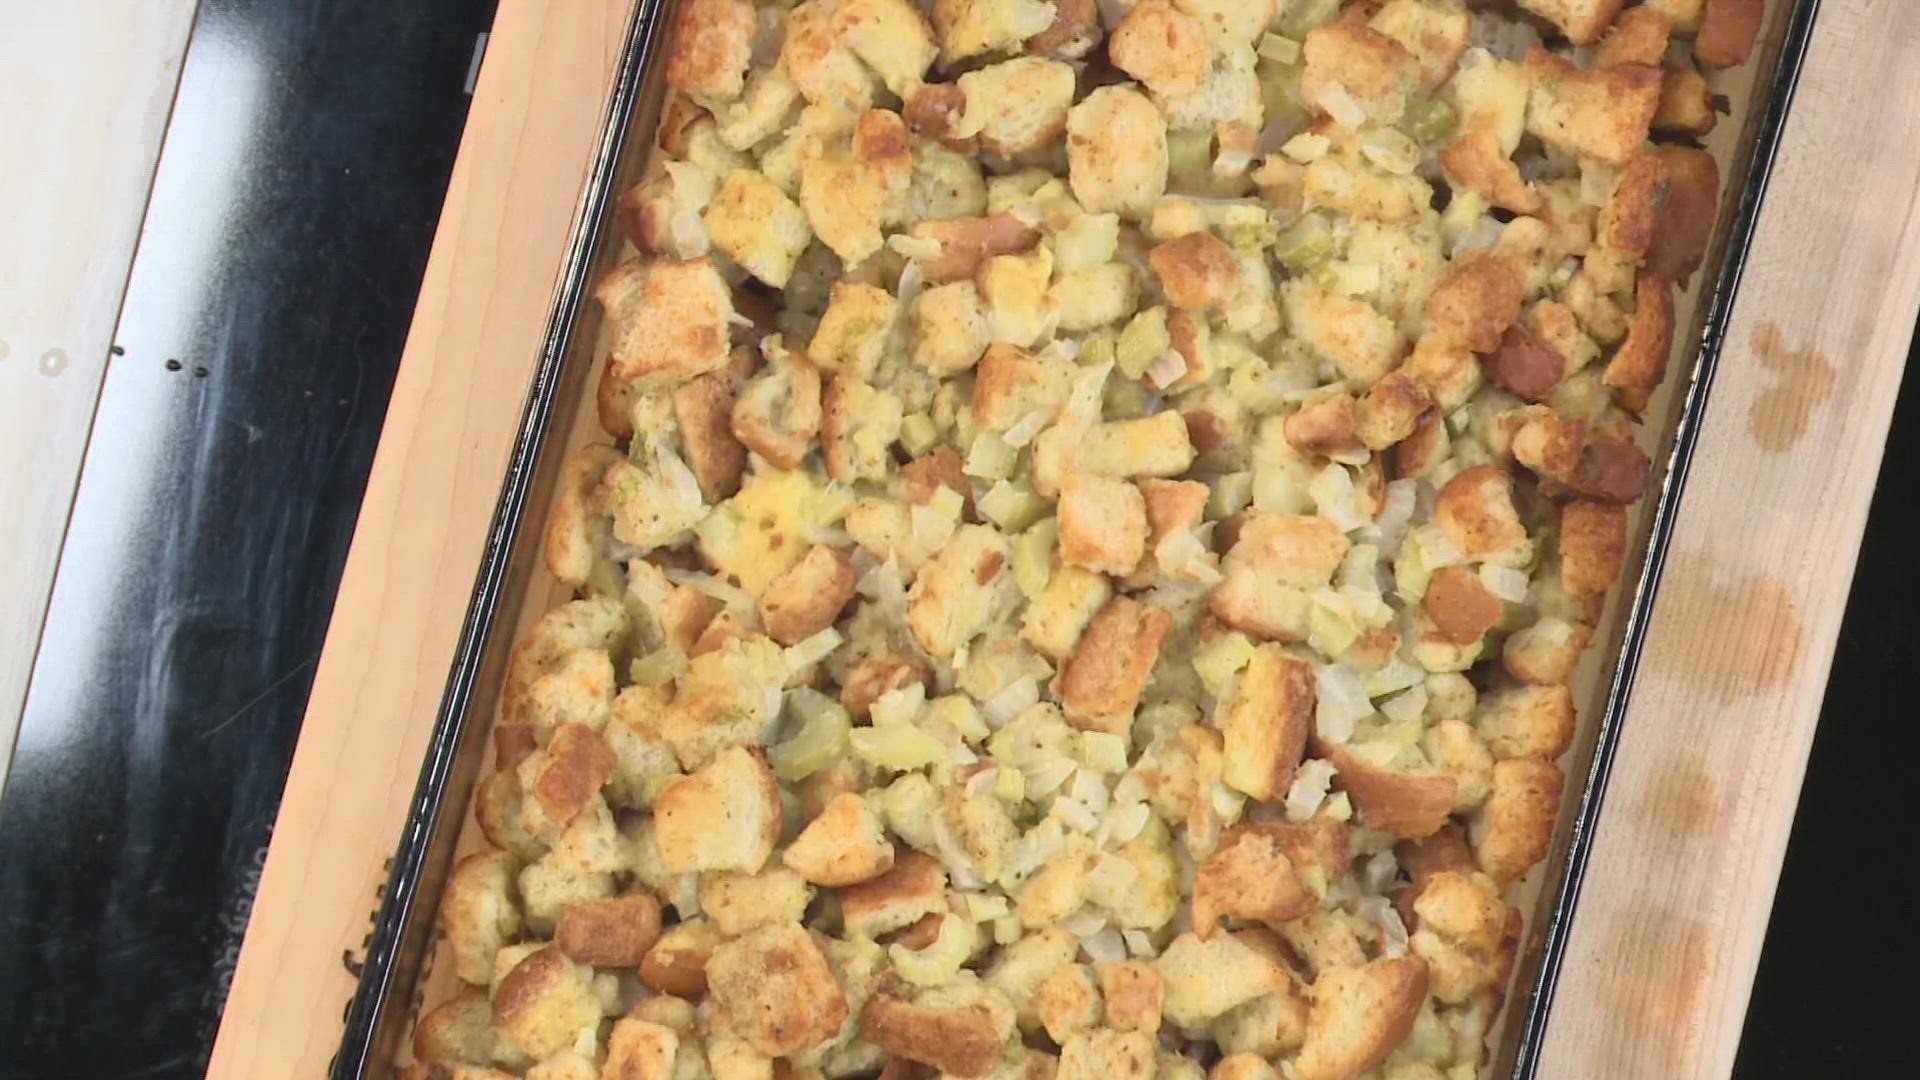 With Thanksgiving just days away, Betsy Kling's mom, Sue, is sharing her family's stuffing recipe.